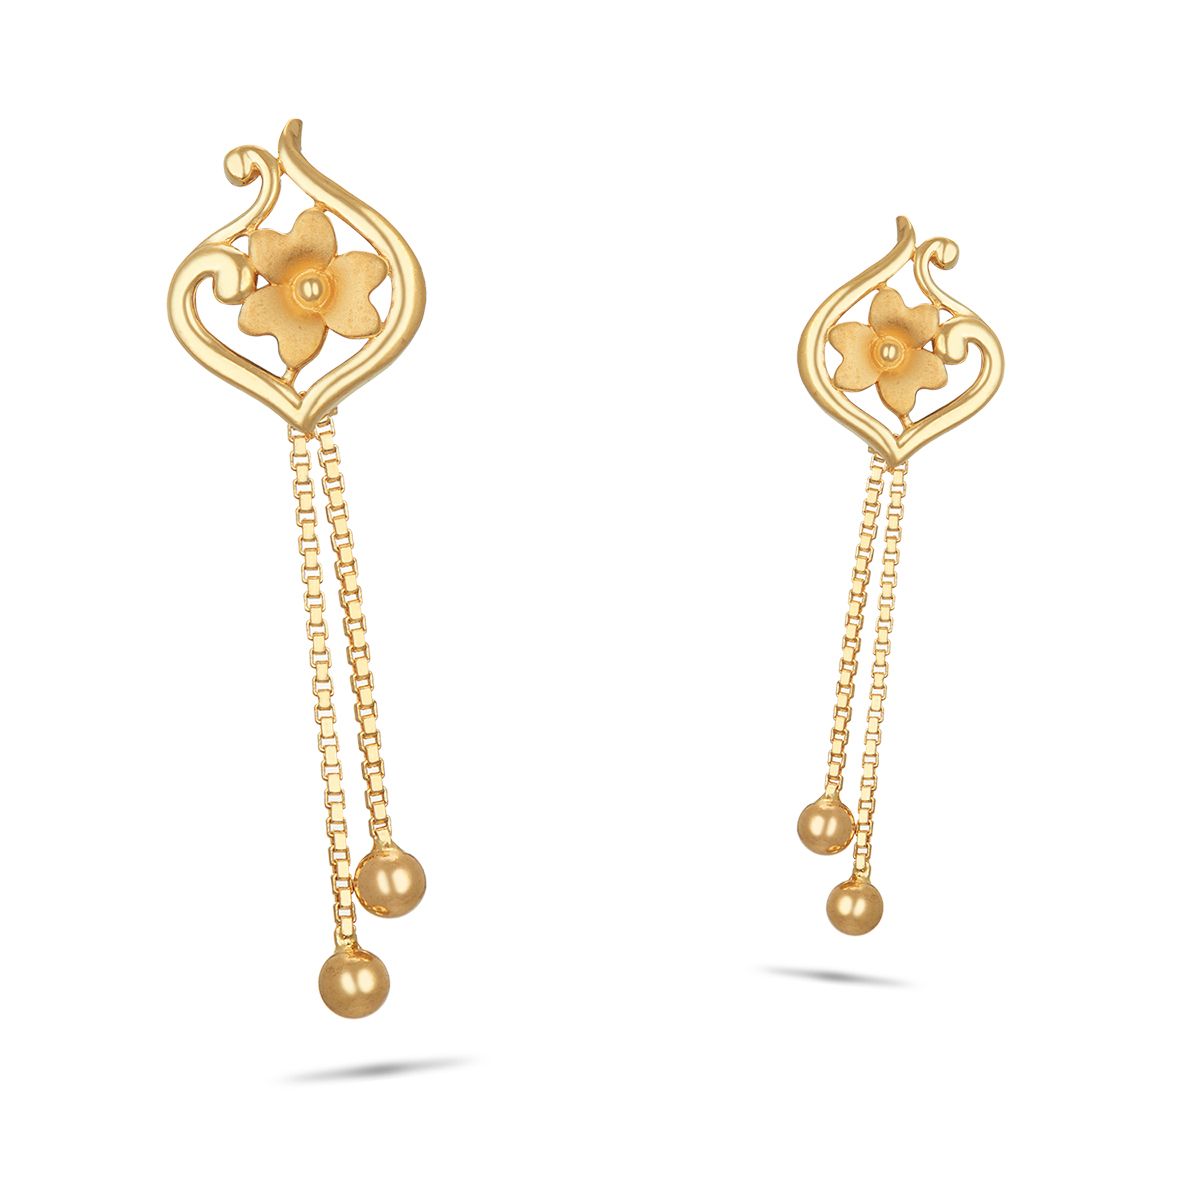 Buy Traditional Earrings Online | Premium Quality | Free Delivery